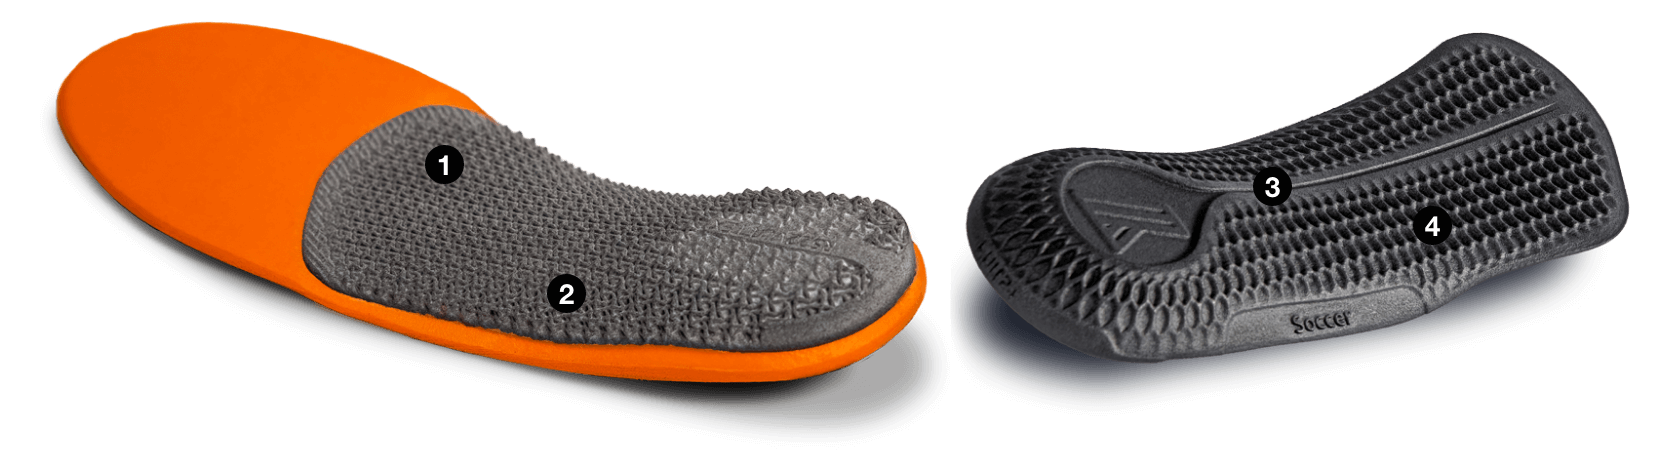 An image revealing the reverse side of two distinct custom orthotics, emphasizing their unique characteristics including stiffness, structural design, and personalized features.